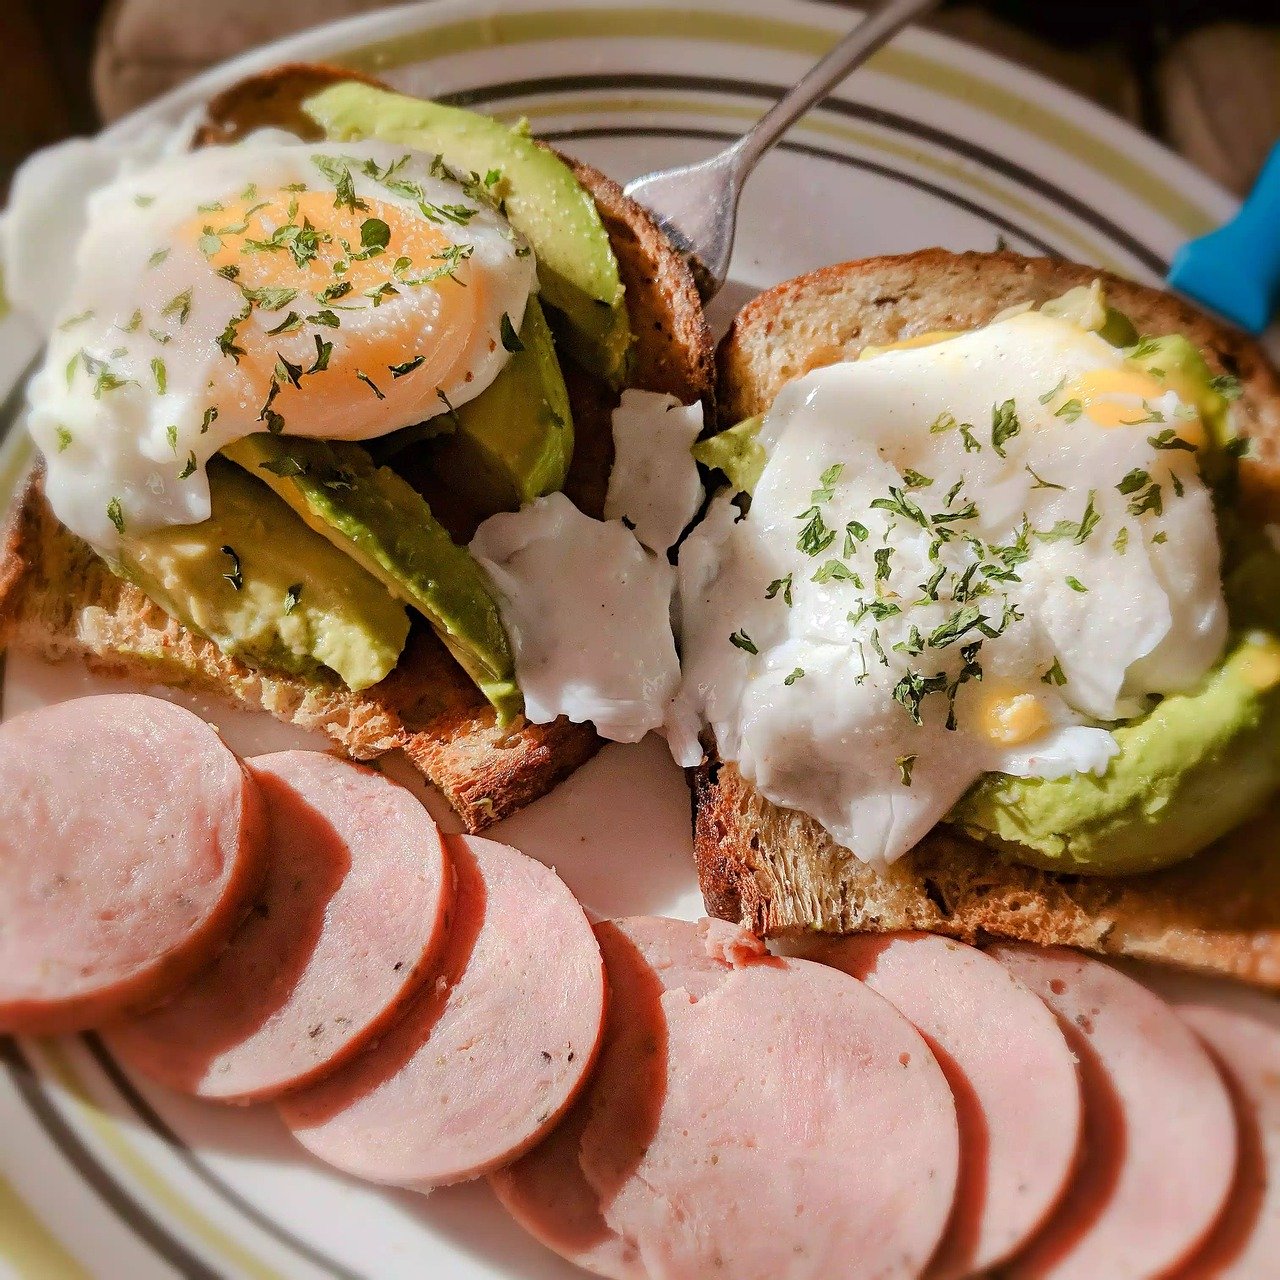 Avocados stuffed with egg and smoked salmon - one of the best keto breakfasts